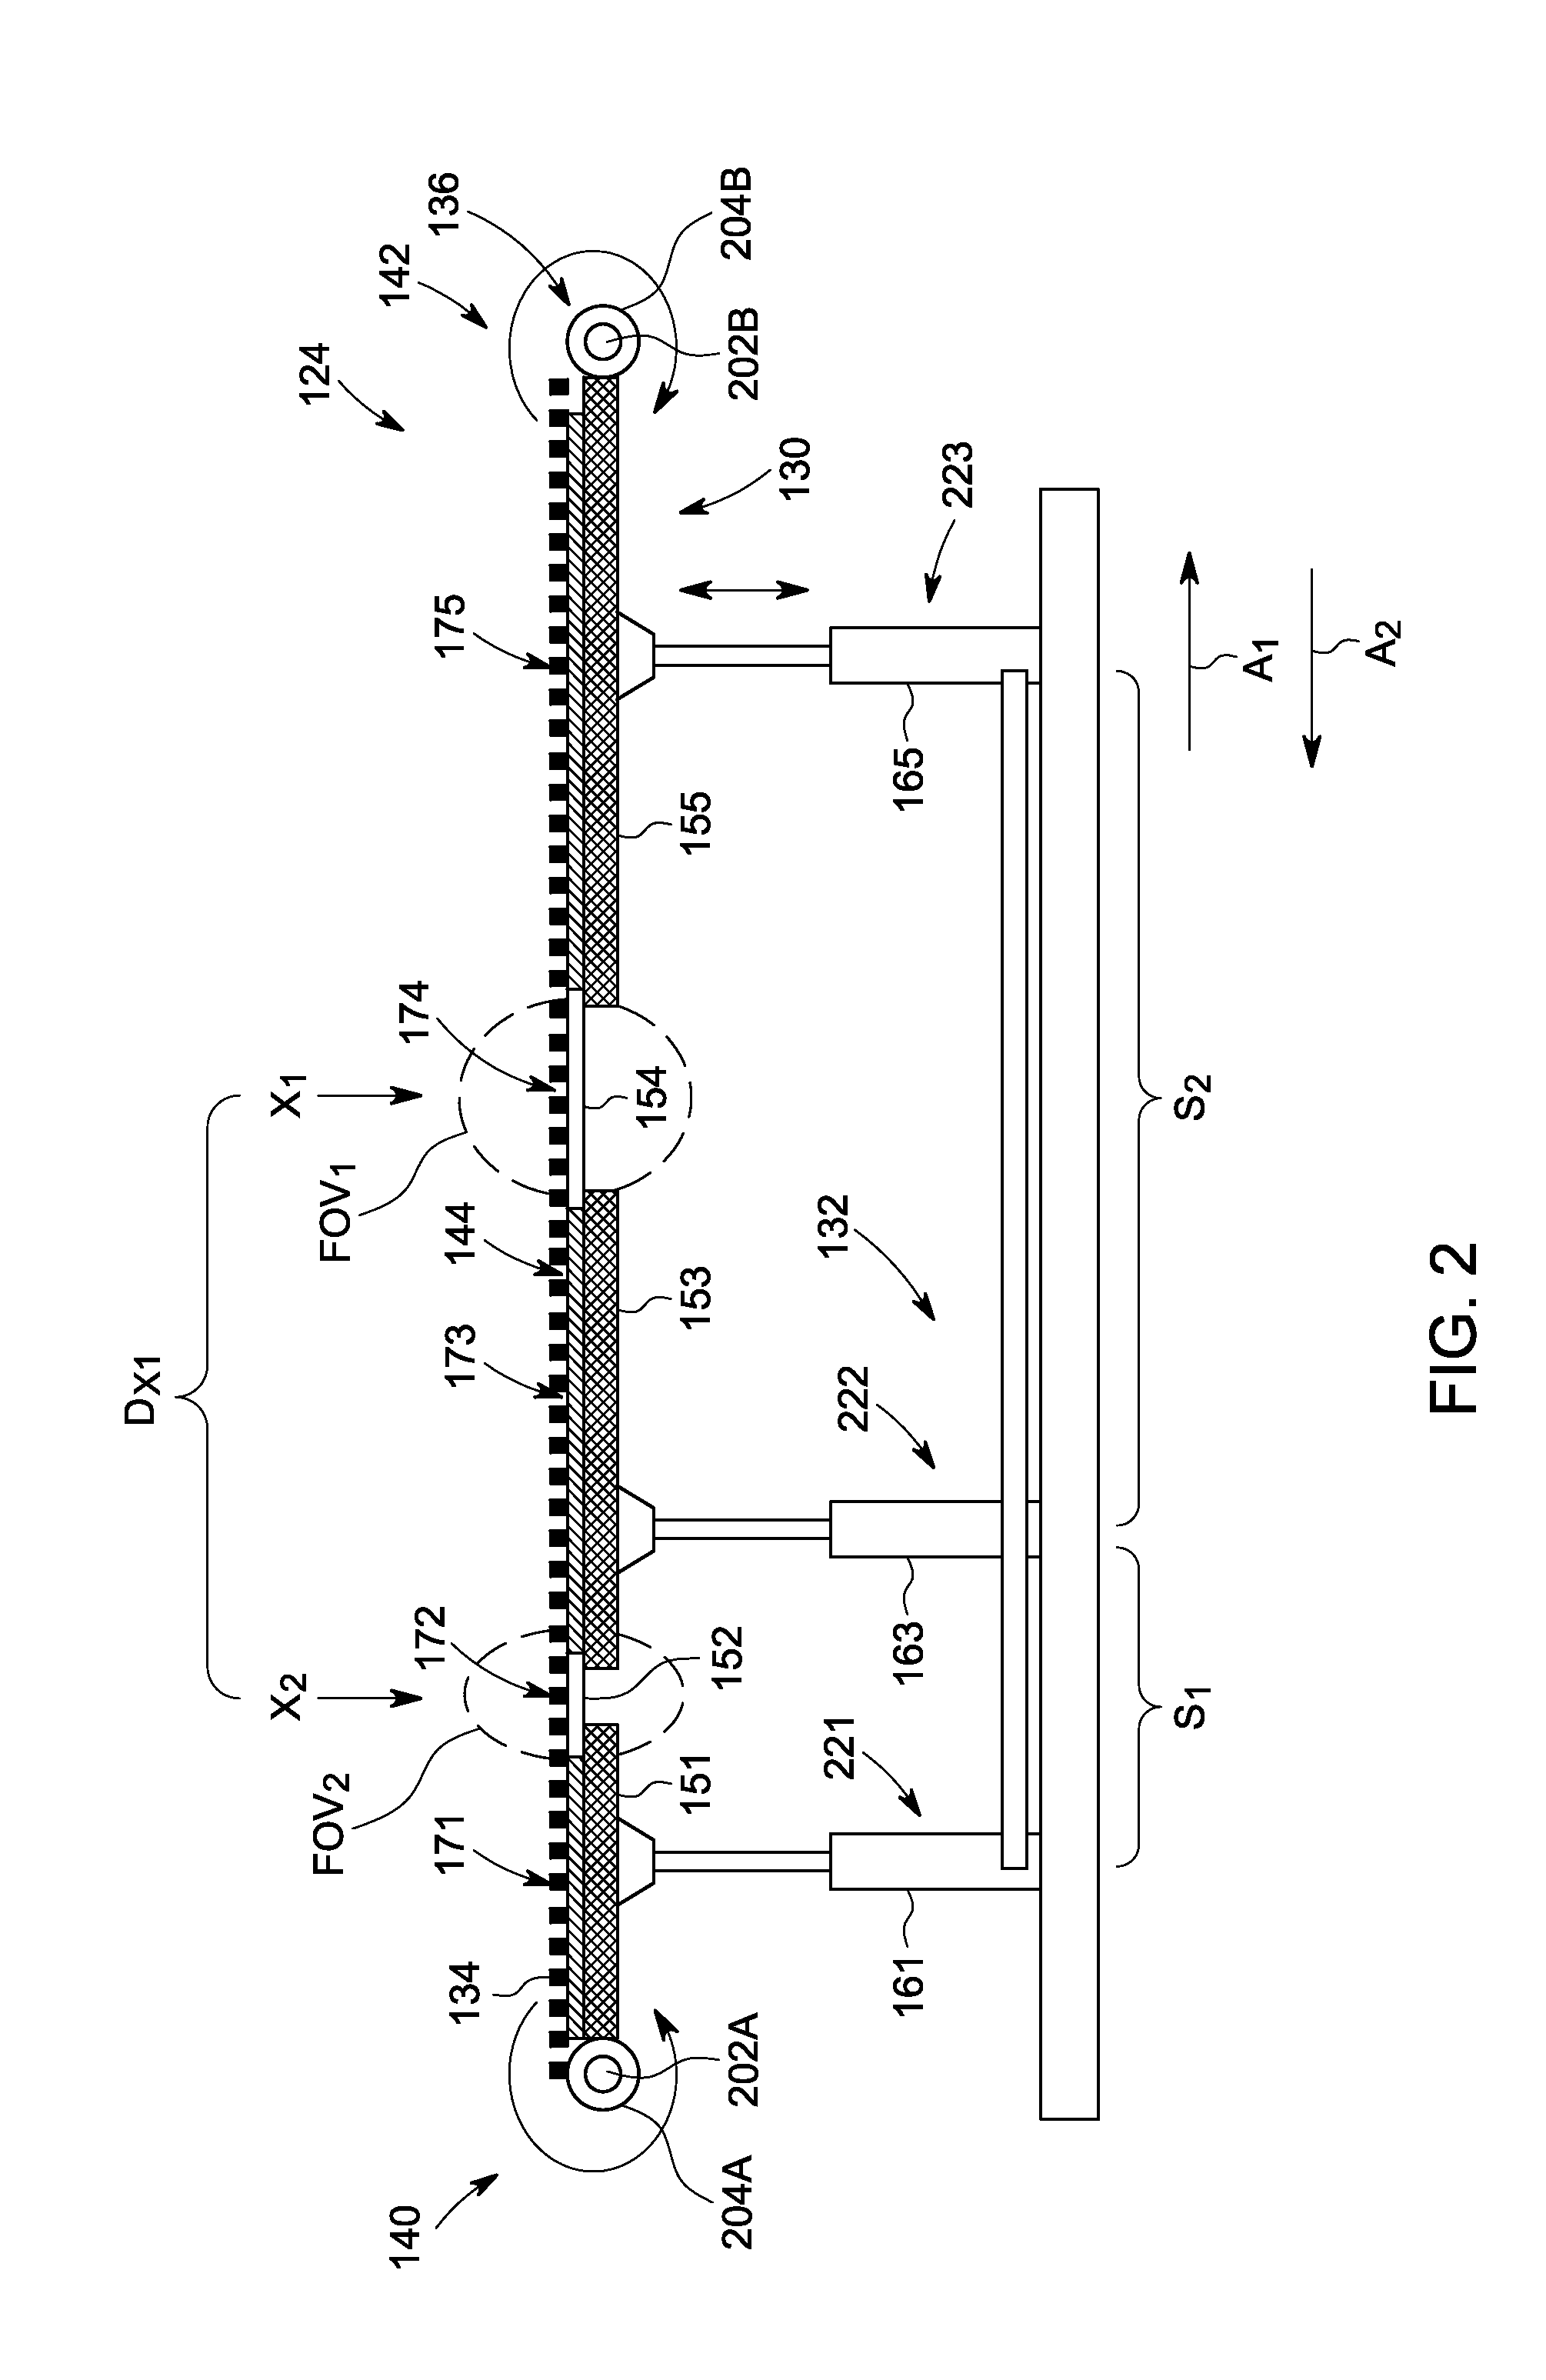 Medical imaging system and patient positioning system including a movable transport belt